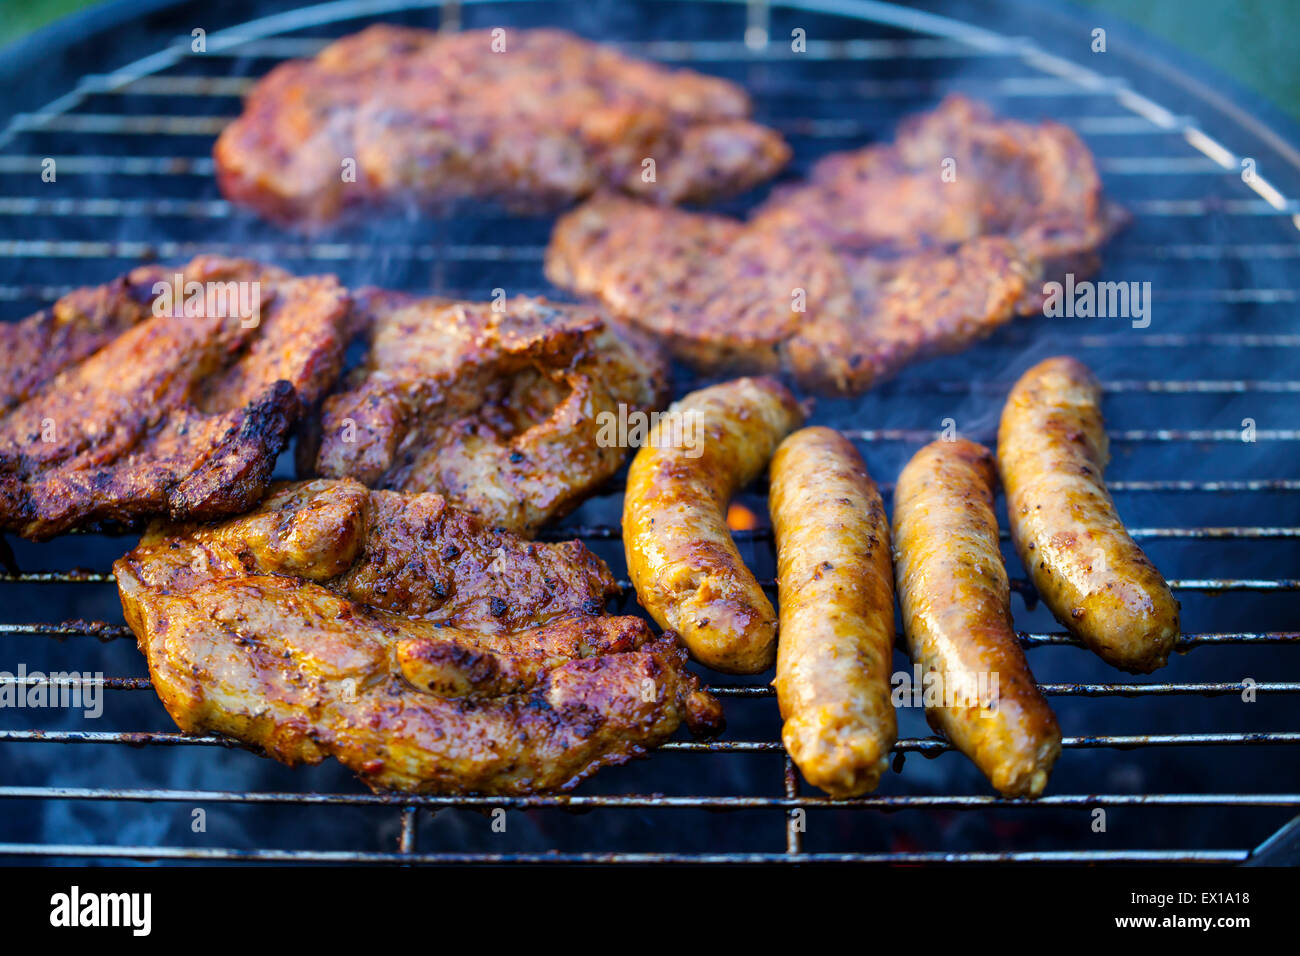 Sausages and meat on bbq Stock Photo